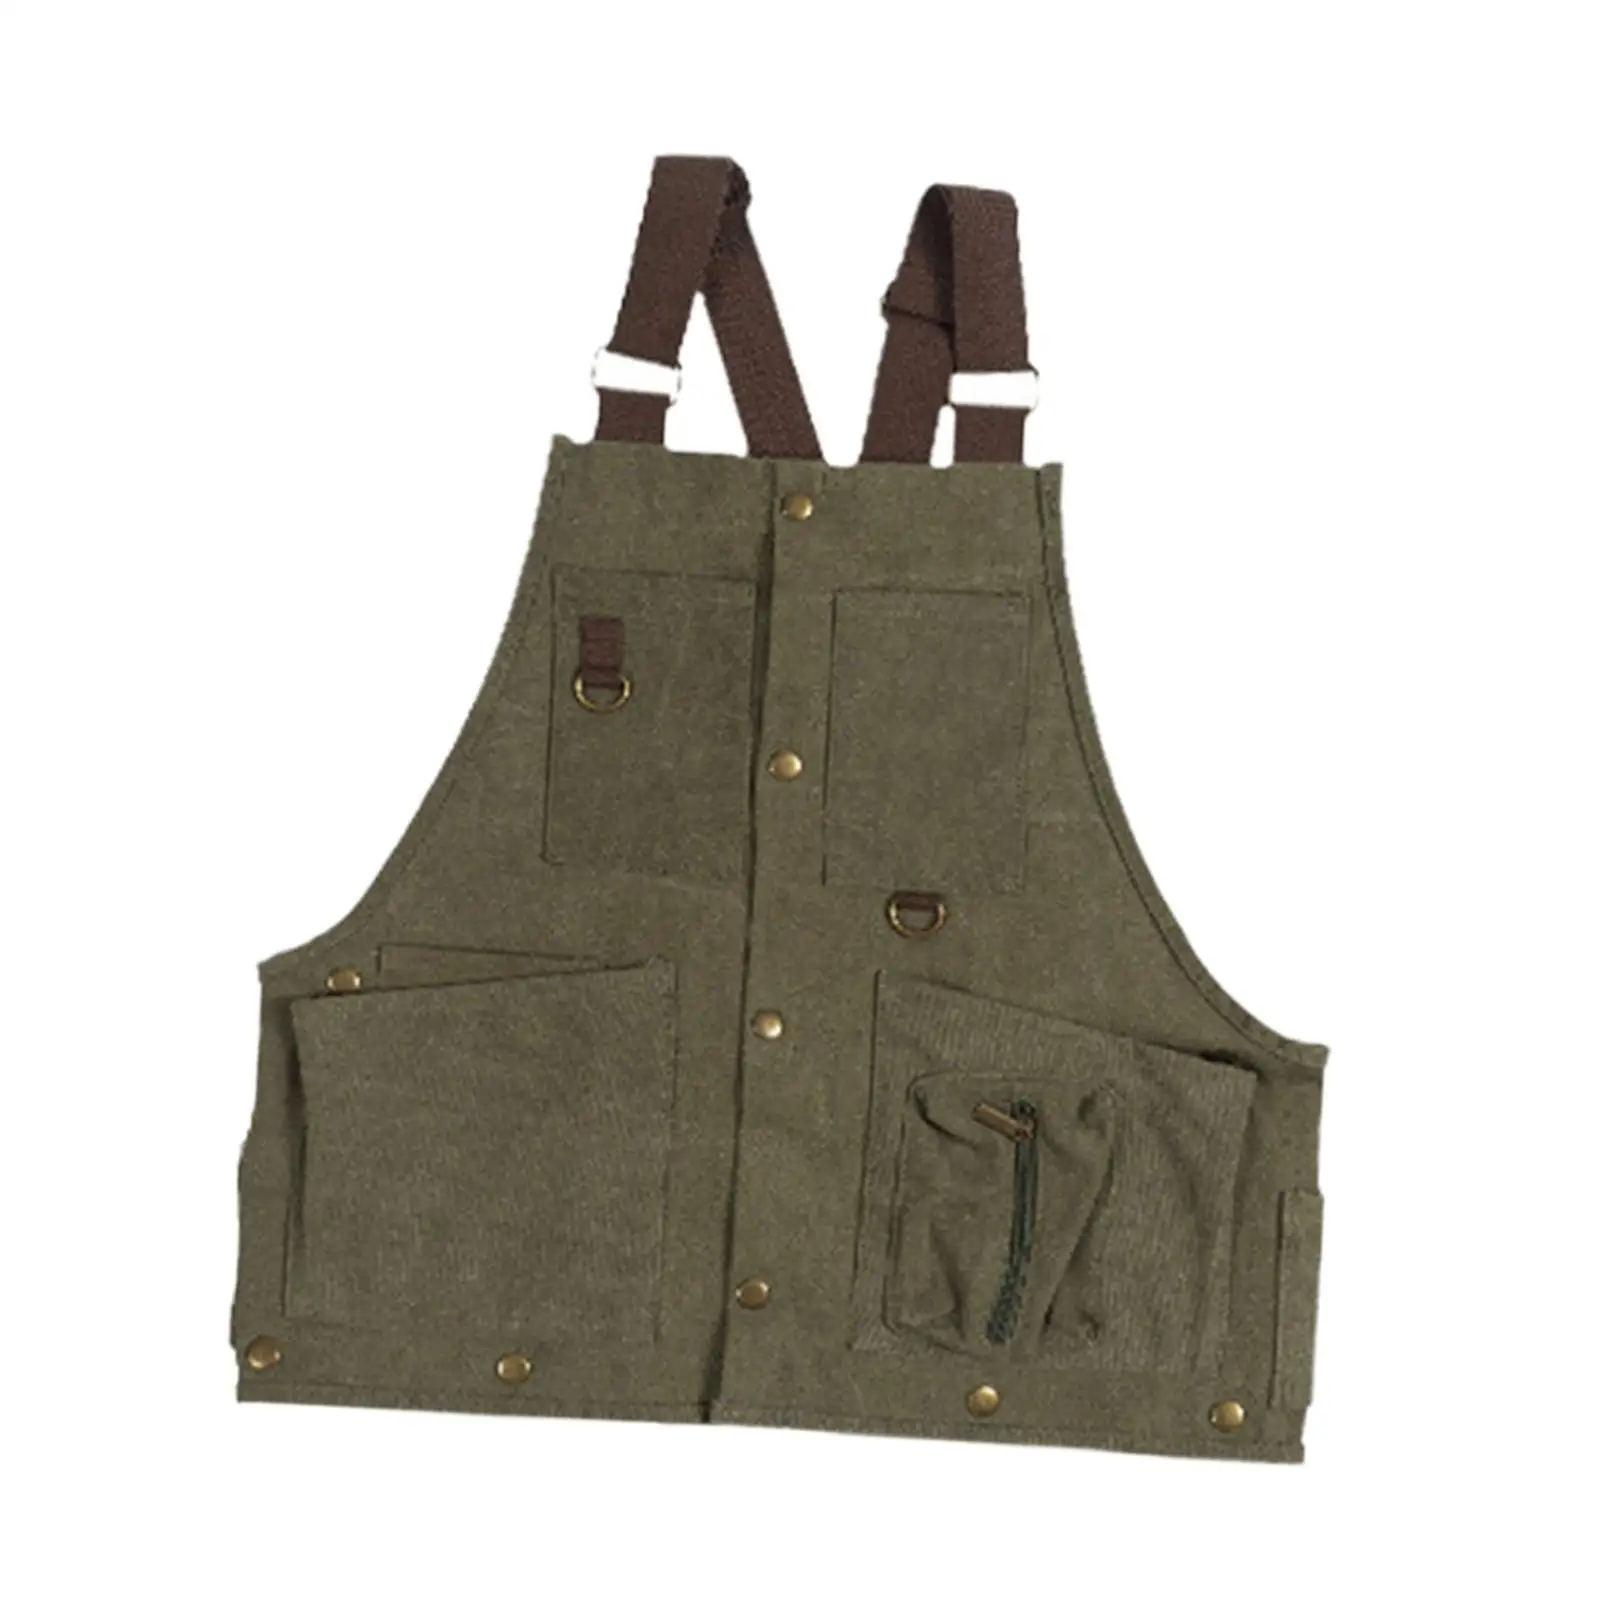 Barbecue Apron Casual Outdoor Camping Vest for Adult Photography Backpacking